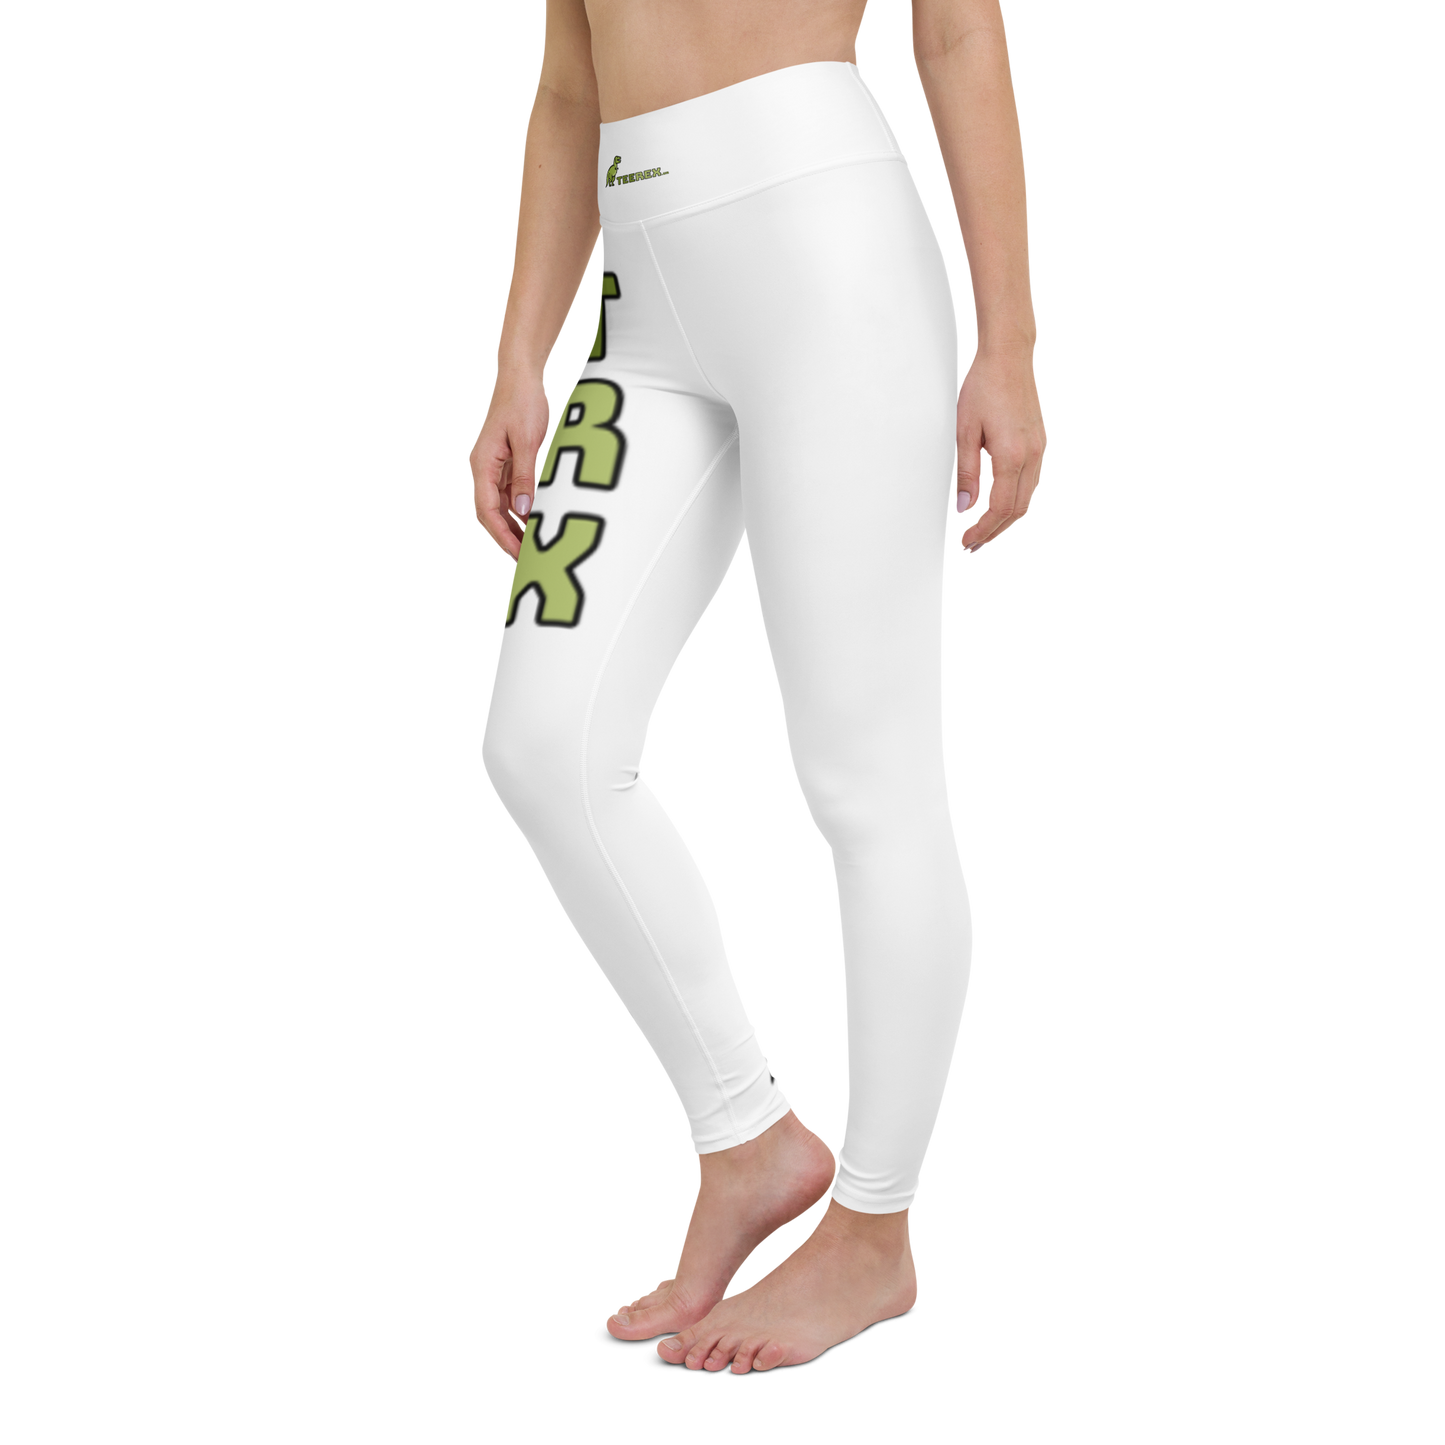 TeeRex Leggings - High Waisted Women's Leggings, Workout Gym Yoga Stretchy - First Edition